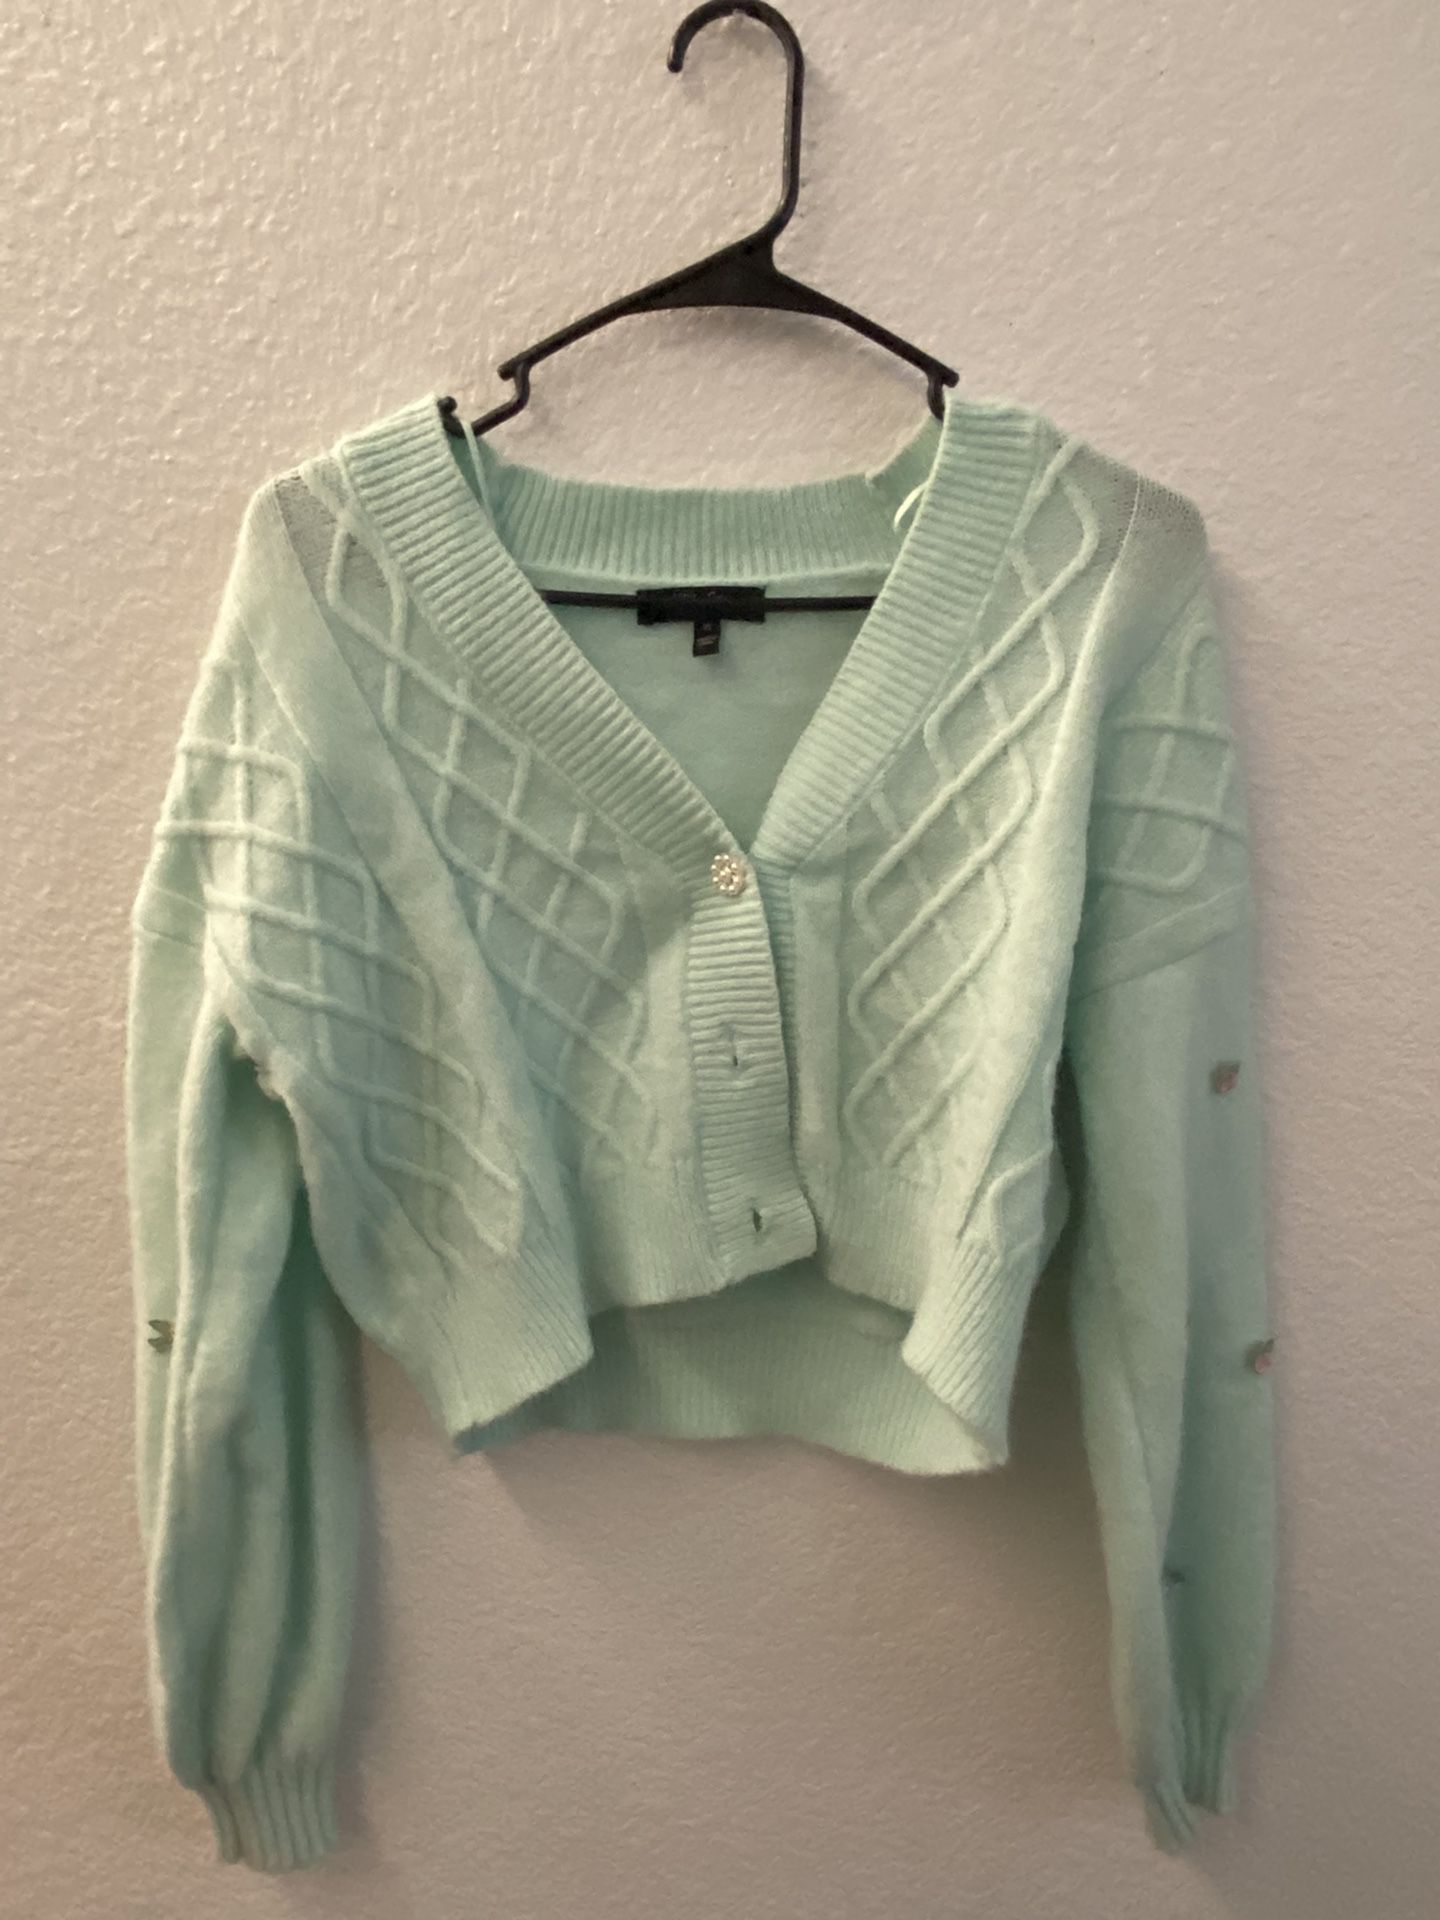 Teal Cardigan With Flower Details 